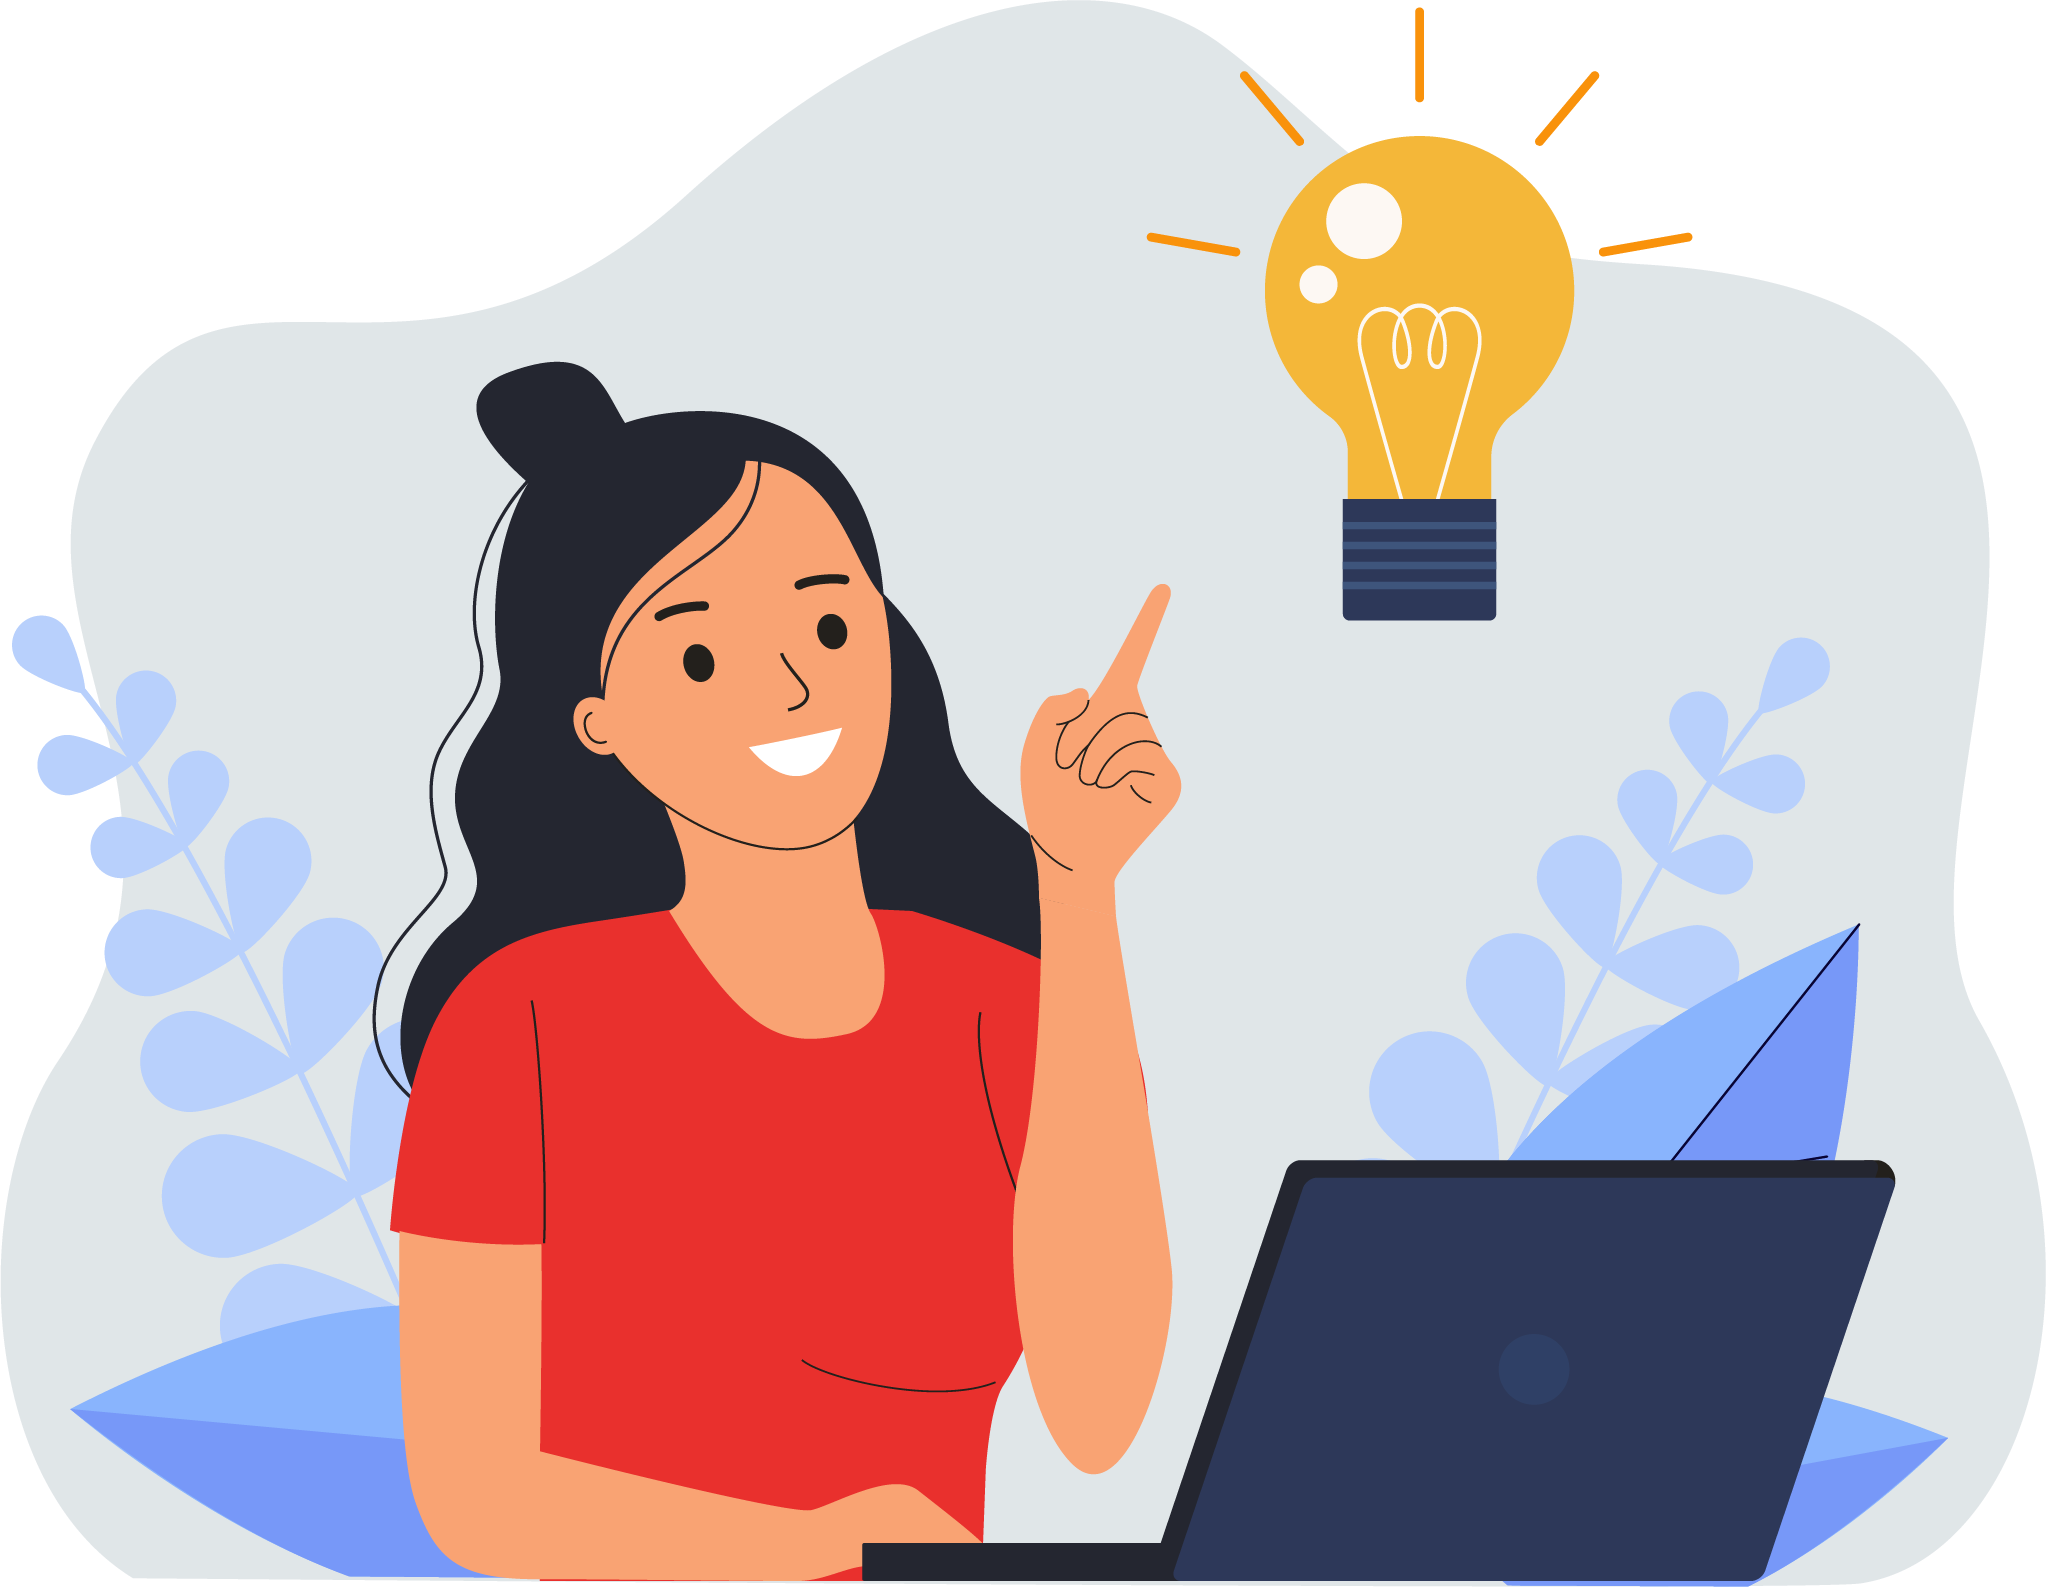 illustration of woman thinking with a light bulb moment